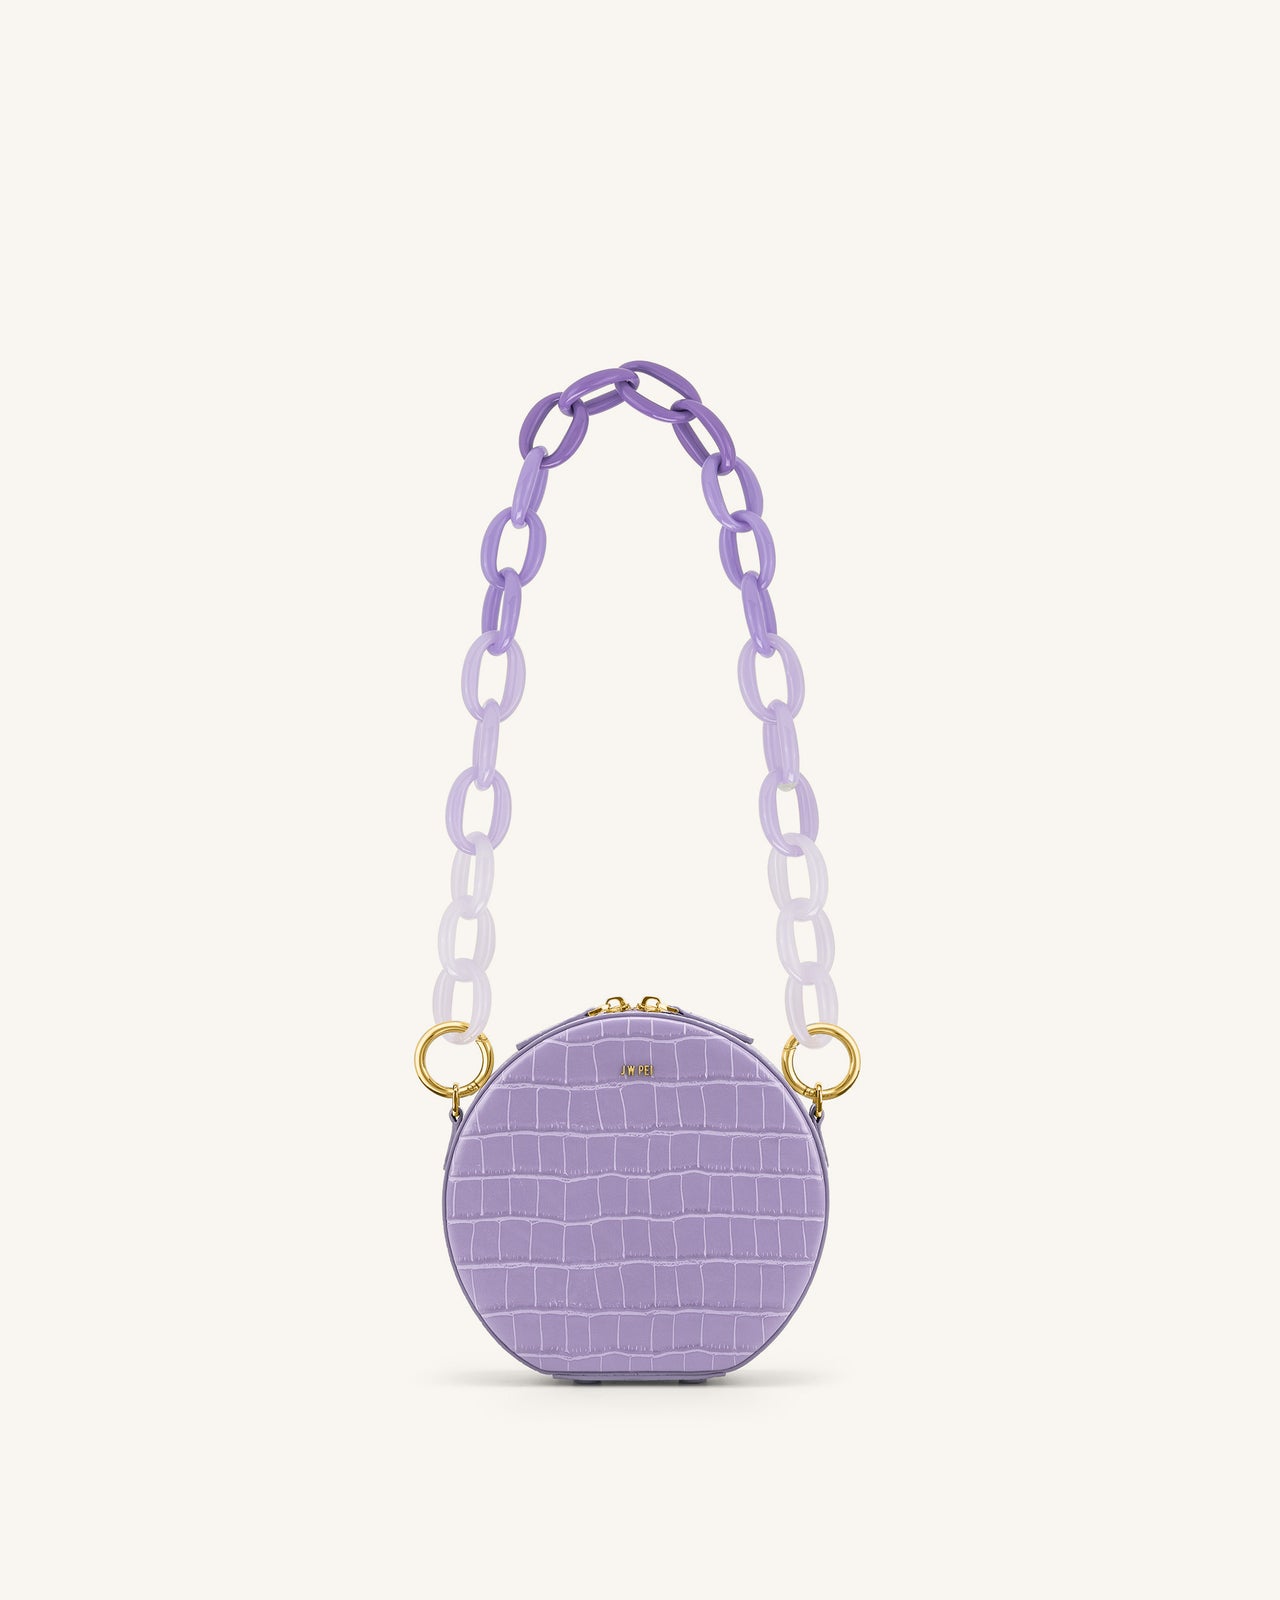 Chain Link Short Acrylic Purse Strap in Lilac